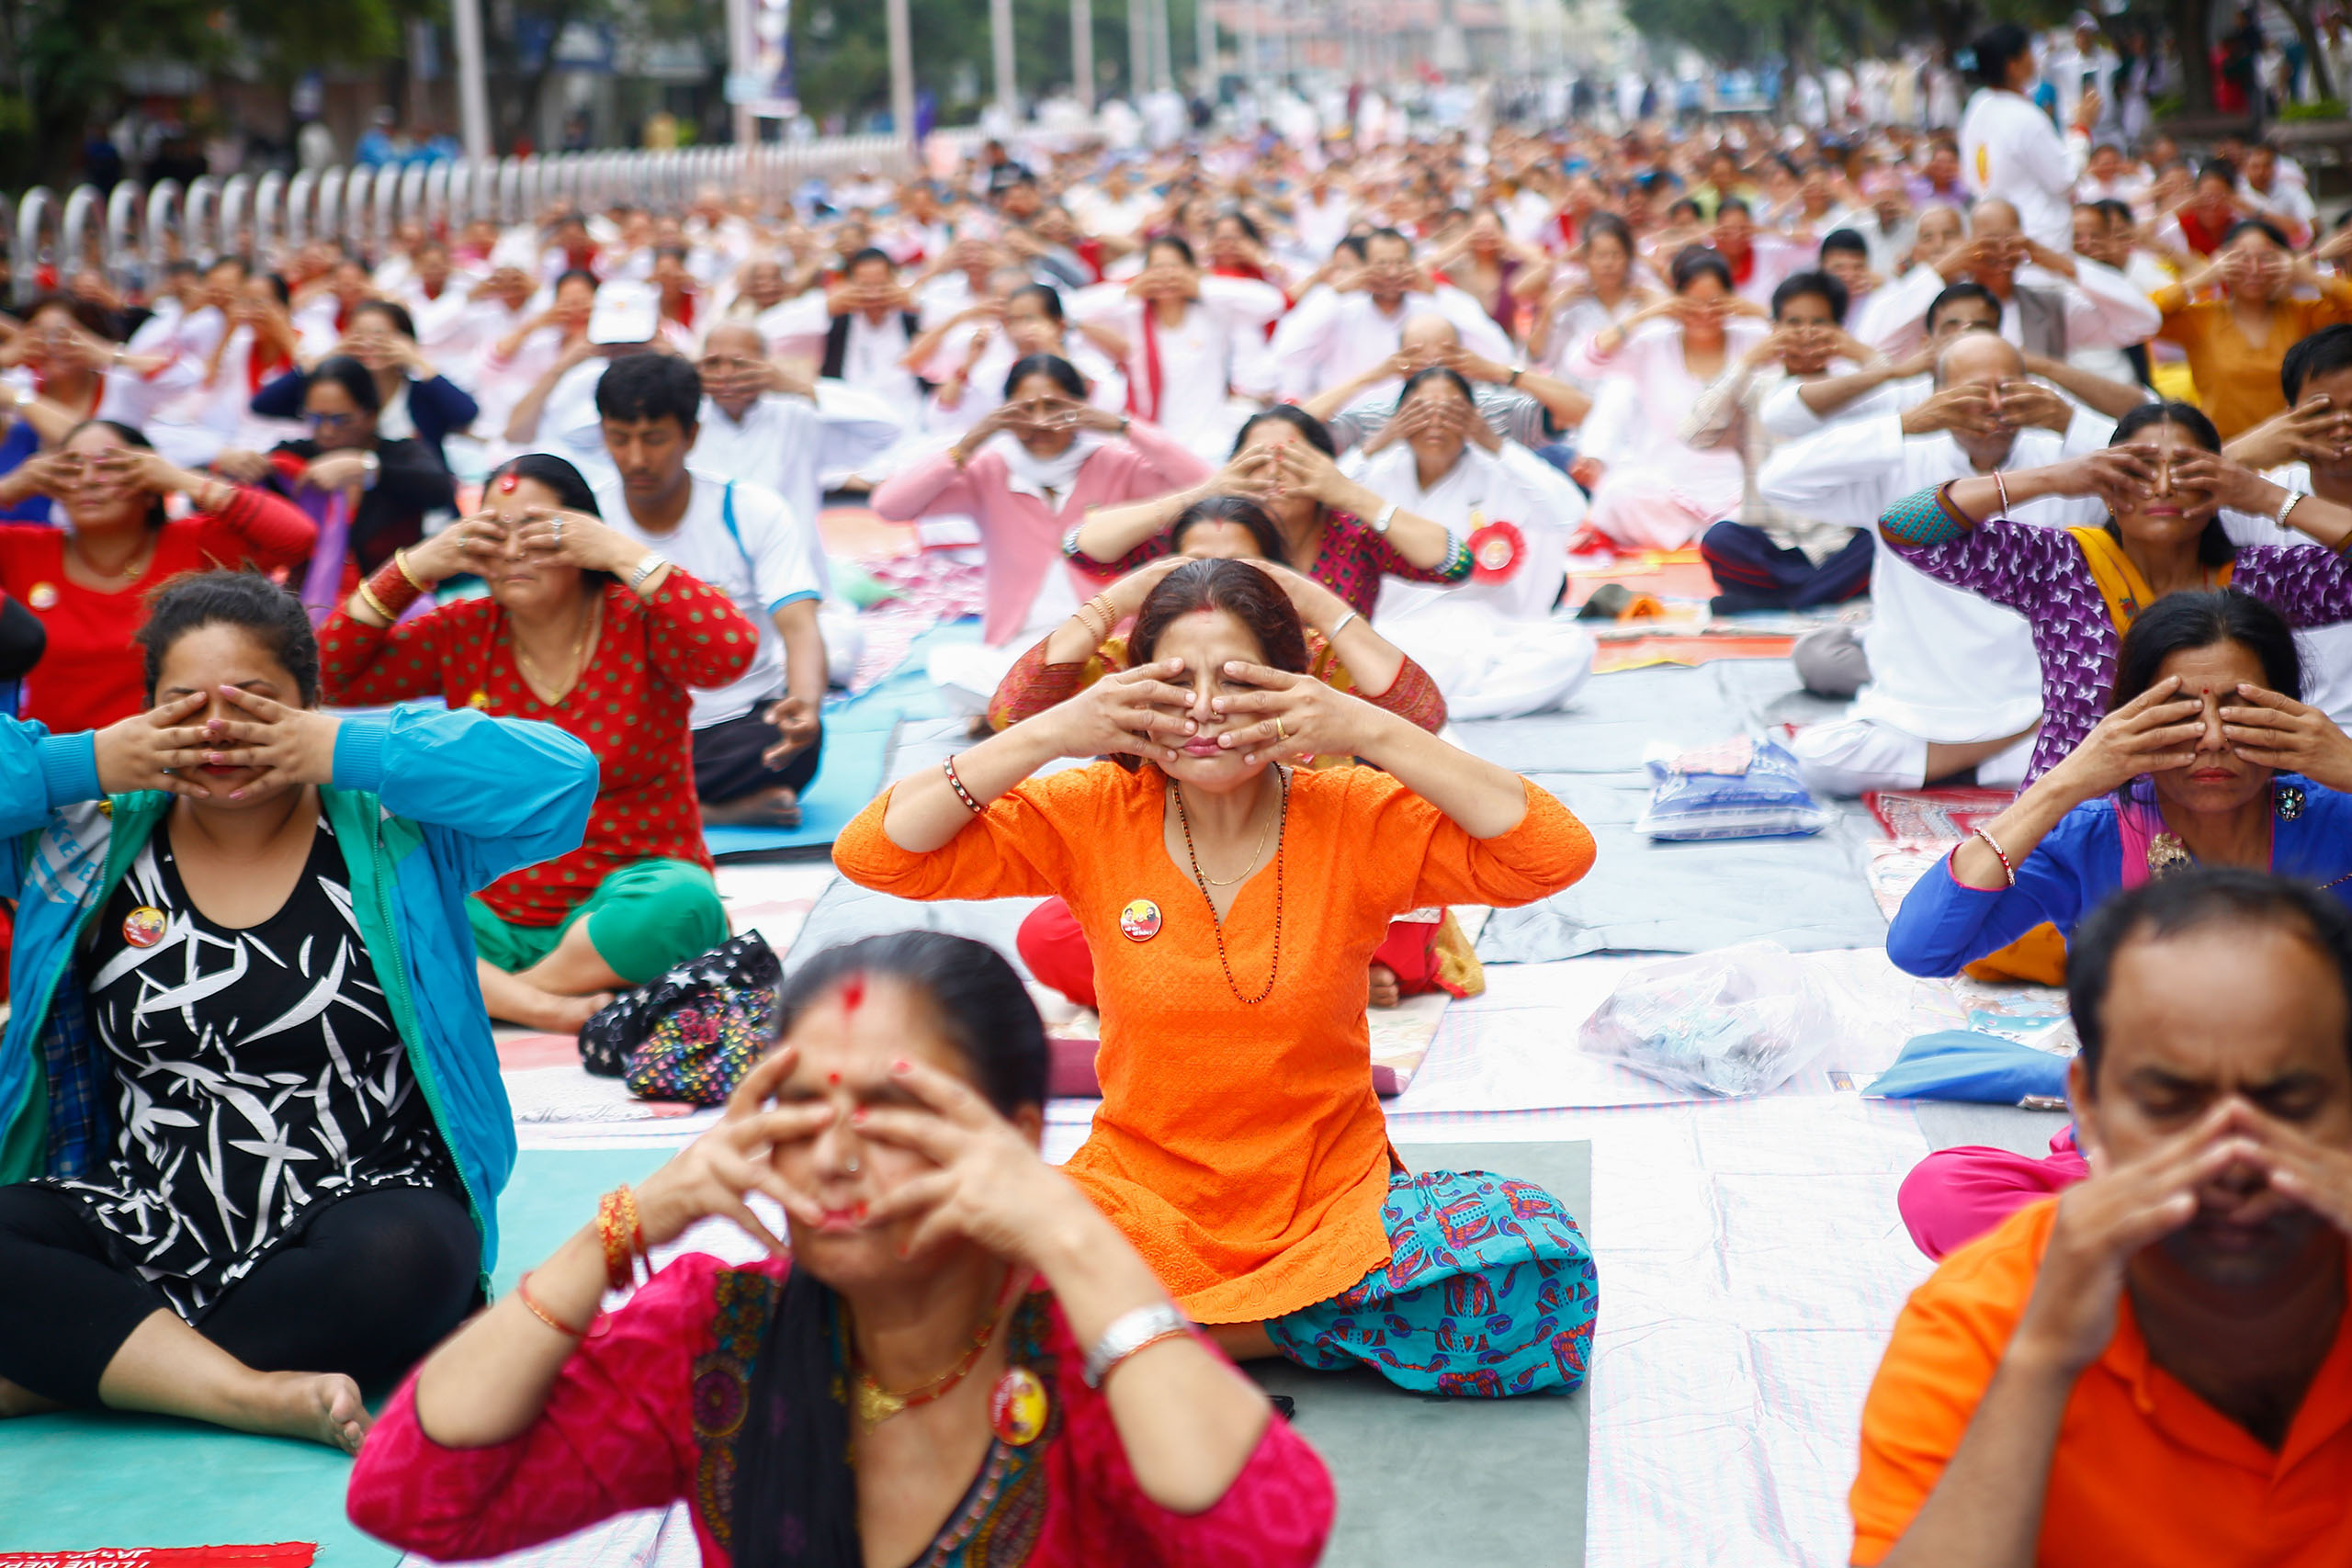 People perform yoga exercises during an event to mark the International Day of Yoga in Kathmandu, Nepal on June 21, 2016.